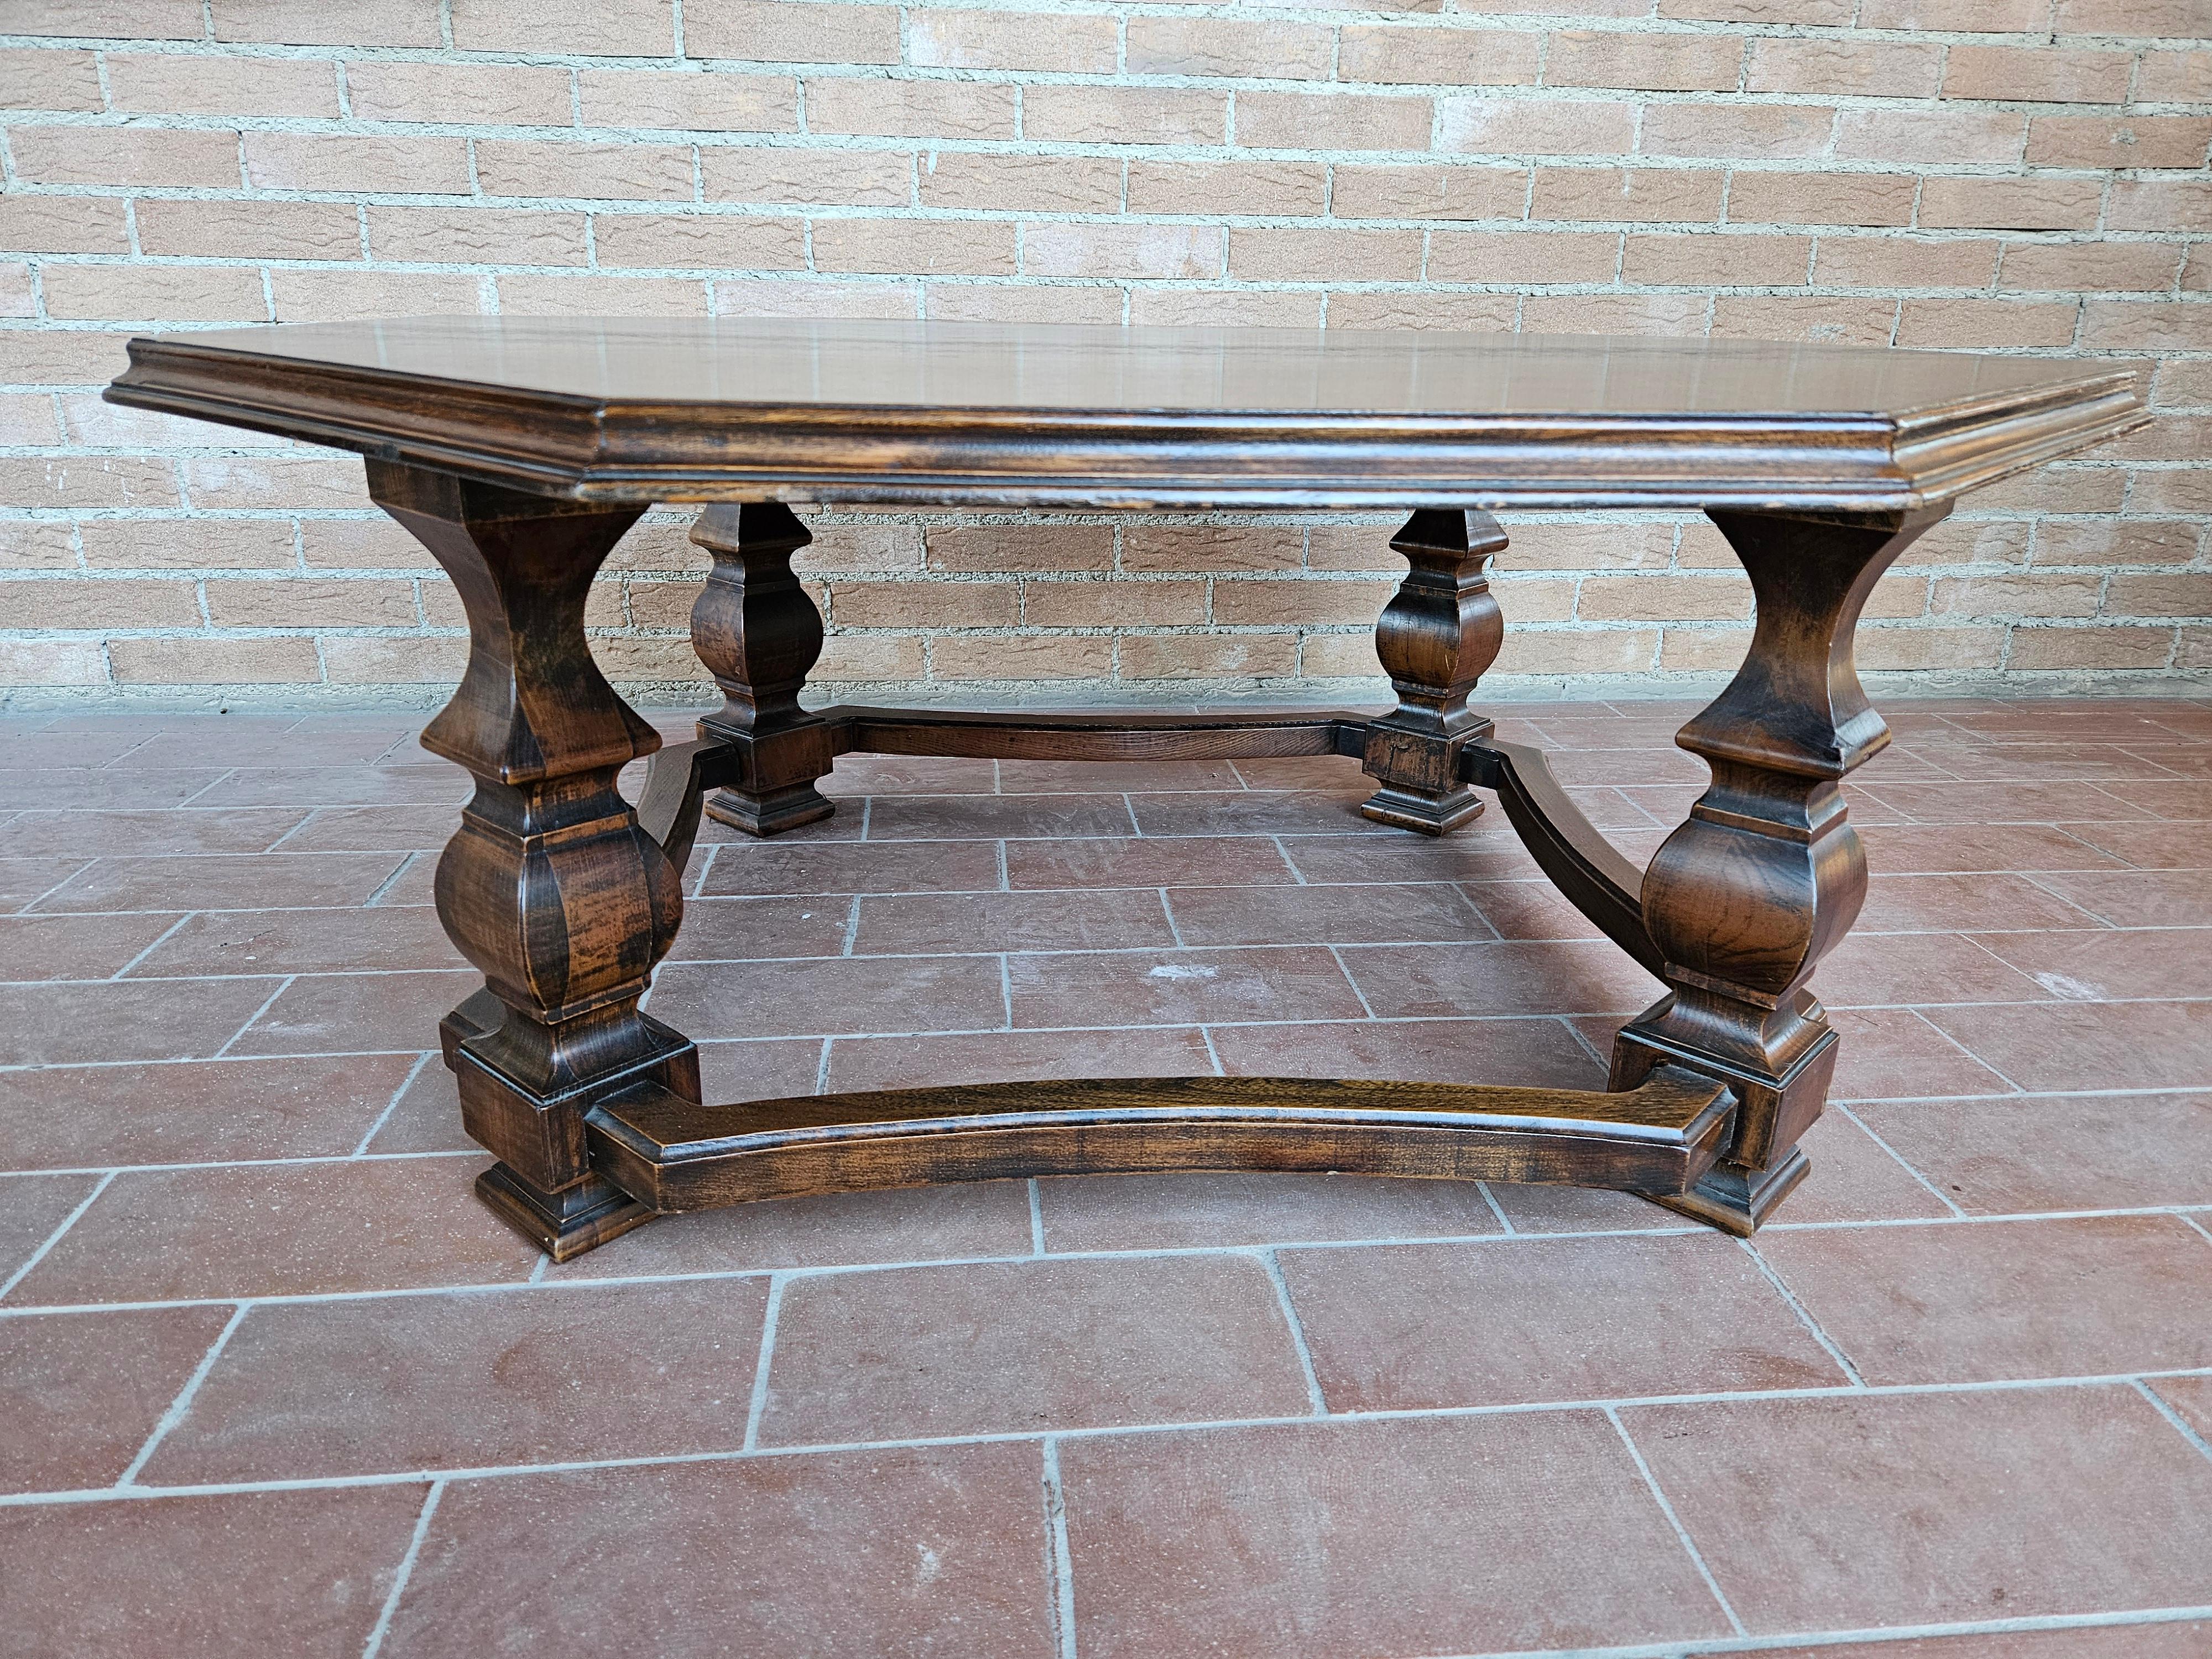 Neoclassical Revival 20th century octagonal coffee table For Sale